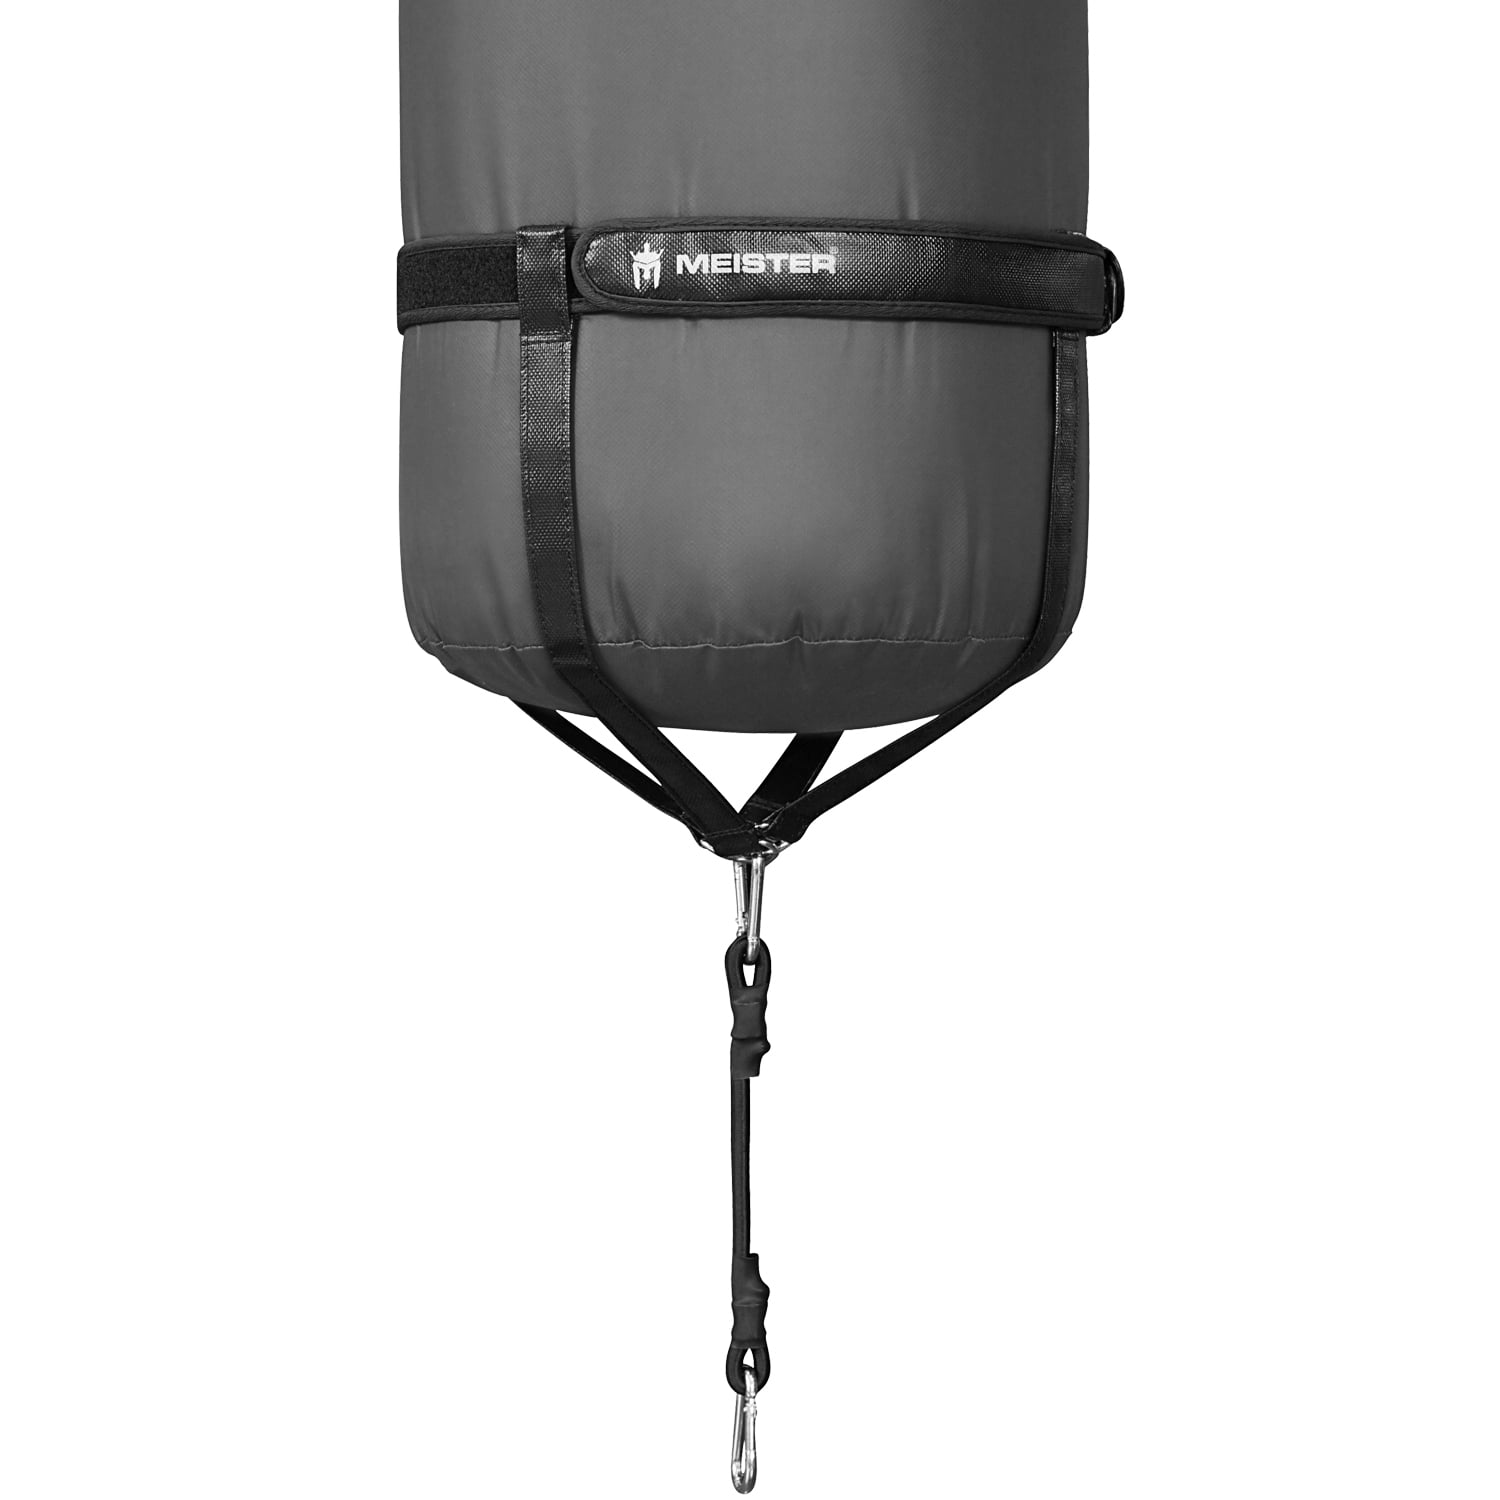 Heavybag Anchor Heavy Duty Punching Bag Base with Chain 